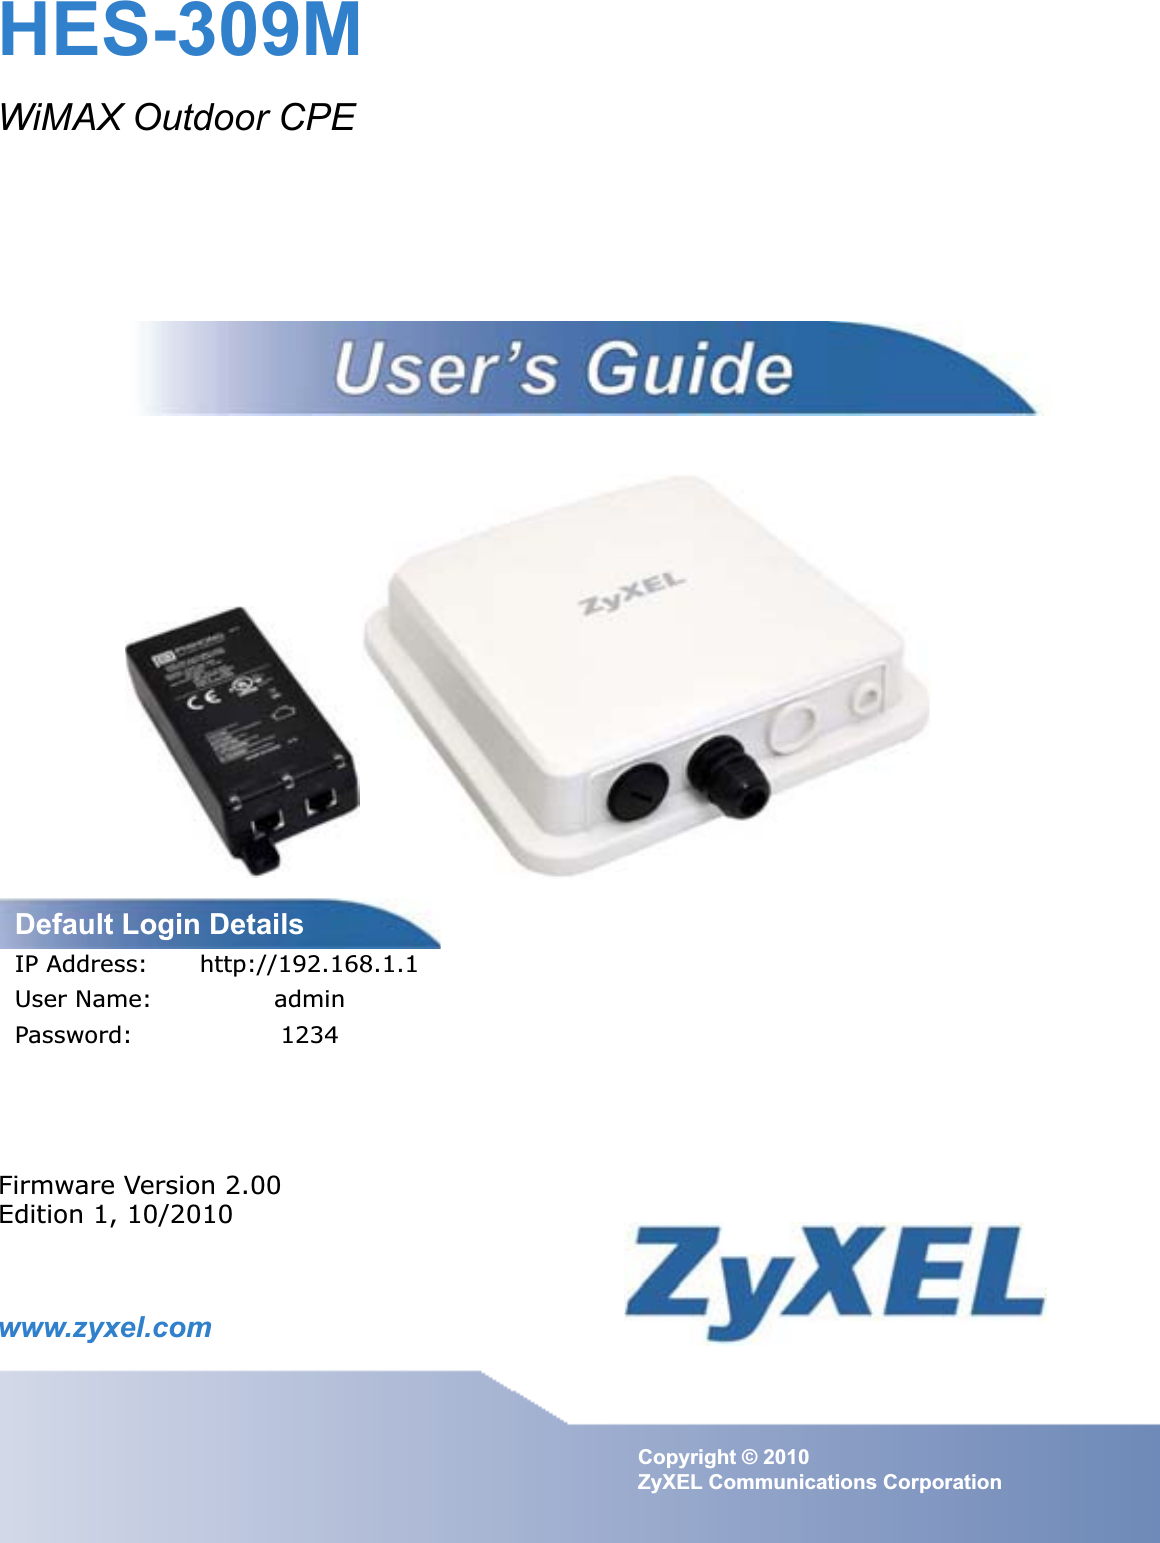 www.zyxel.comwww.zyxel.comHES-309MWiMAX Outdoor CPECopyright © 2010ZyXEL Communications CorporationFirmware Version 2.00Edition 1, 10/2010Default Login DetailsIP Address: http://192.168.1.1User Name: adminPassword: 1234